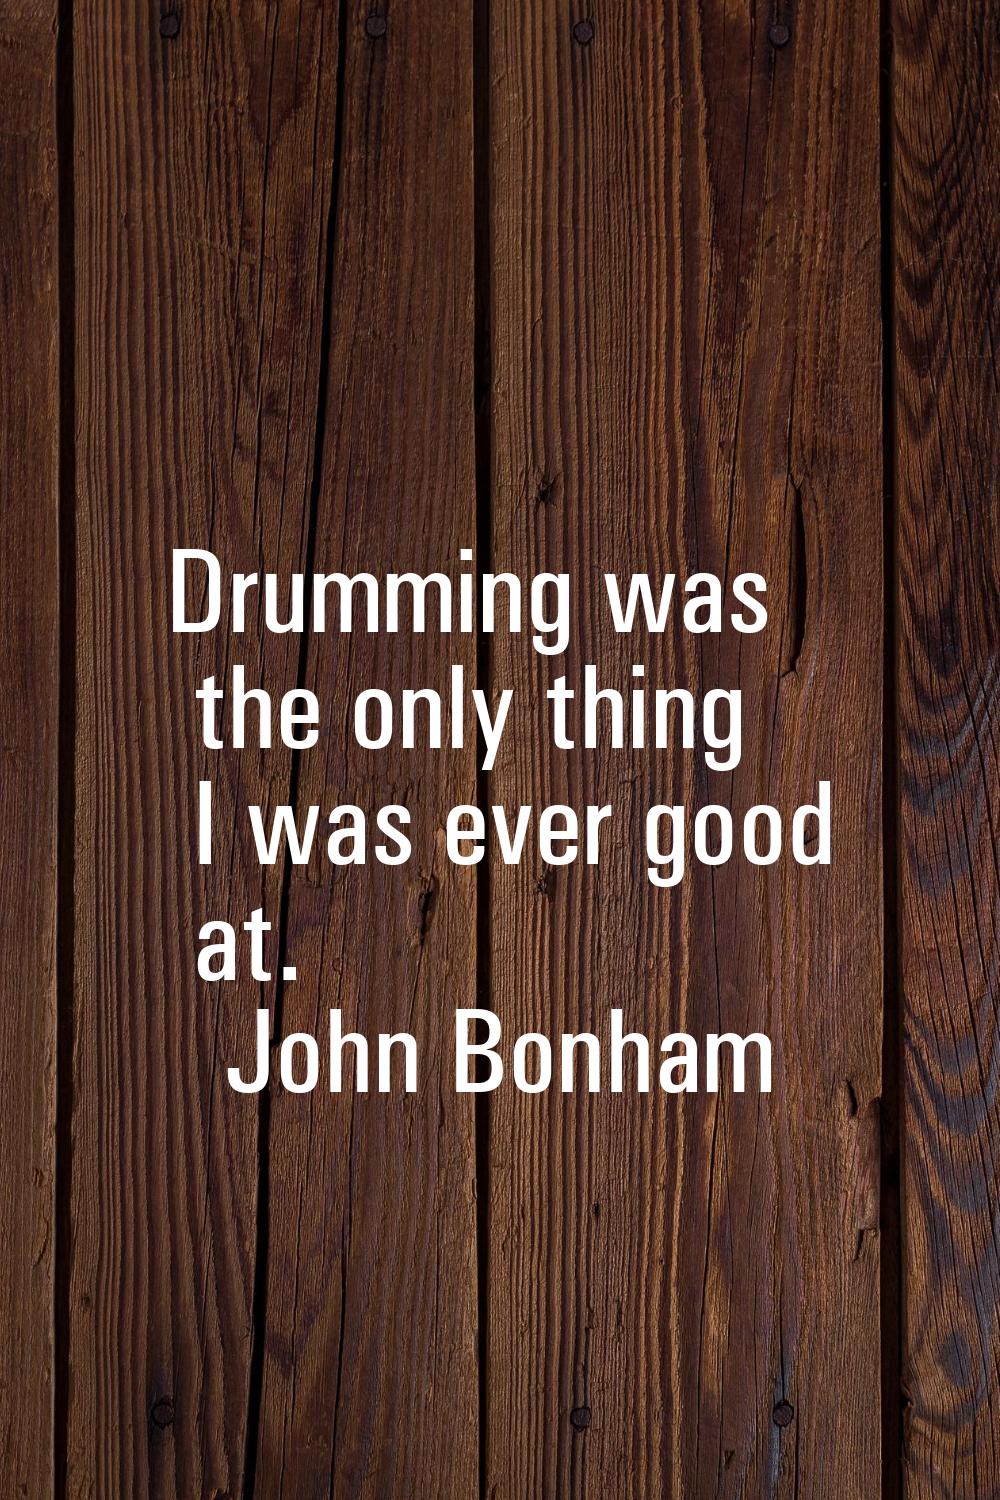 Drumming was the only thing I was ever good at.